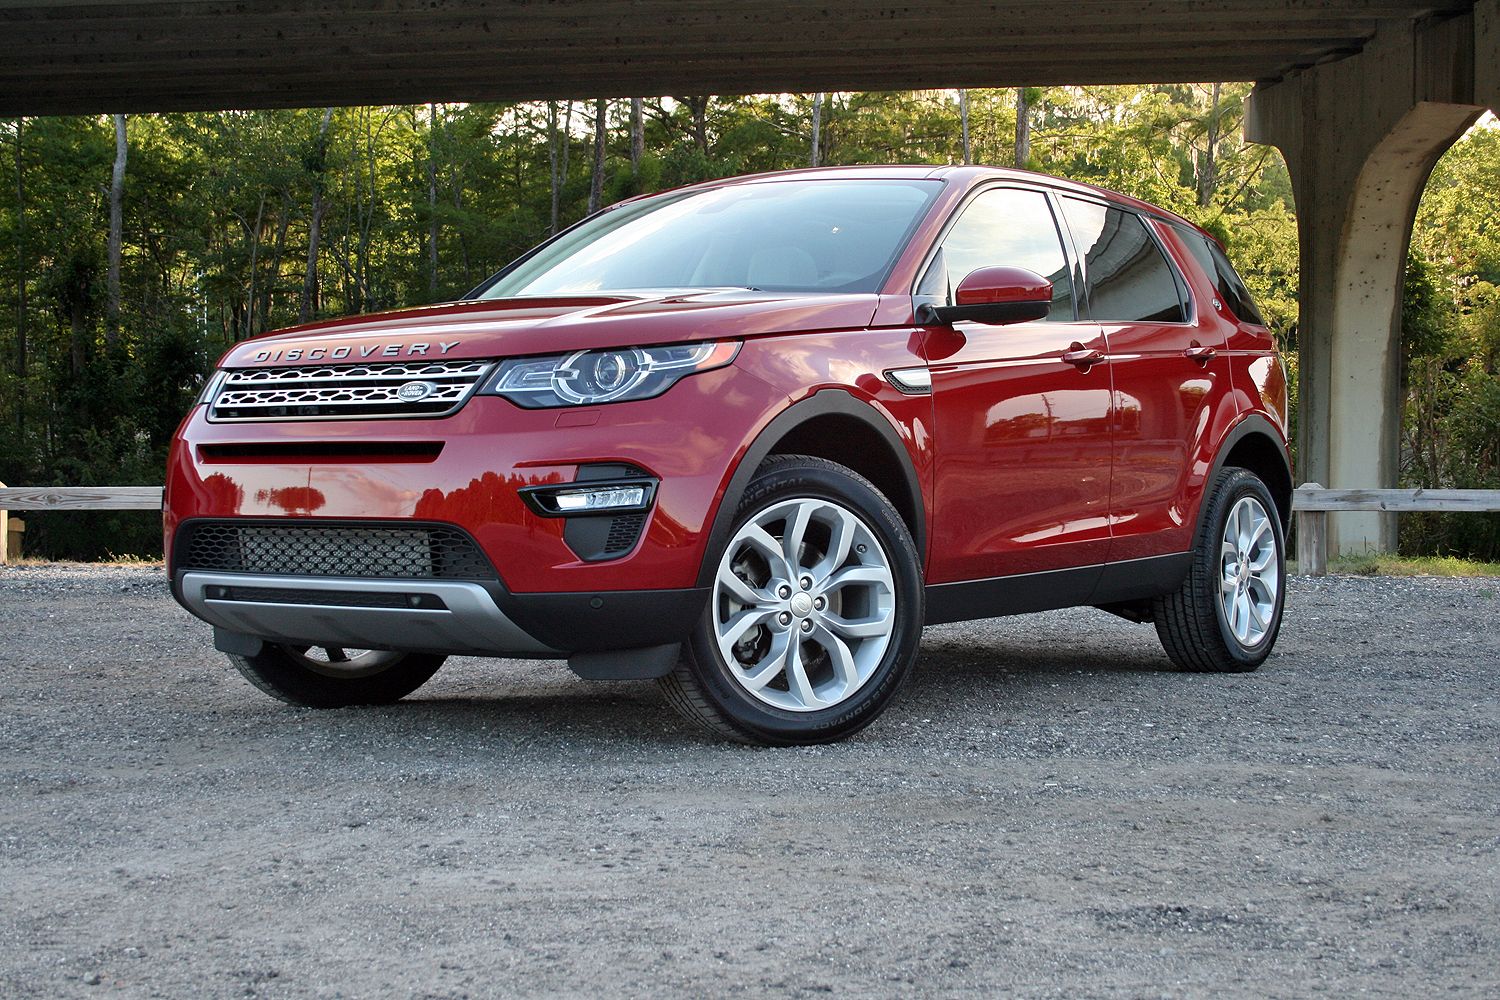 2015 Land Rover Discovery Sport - Driven